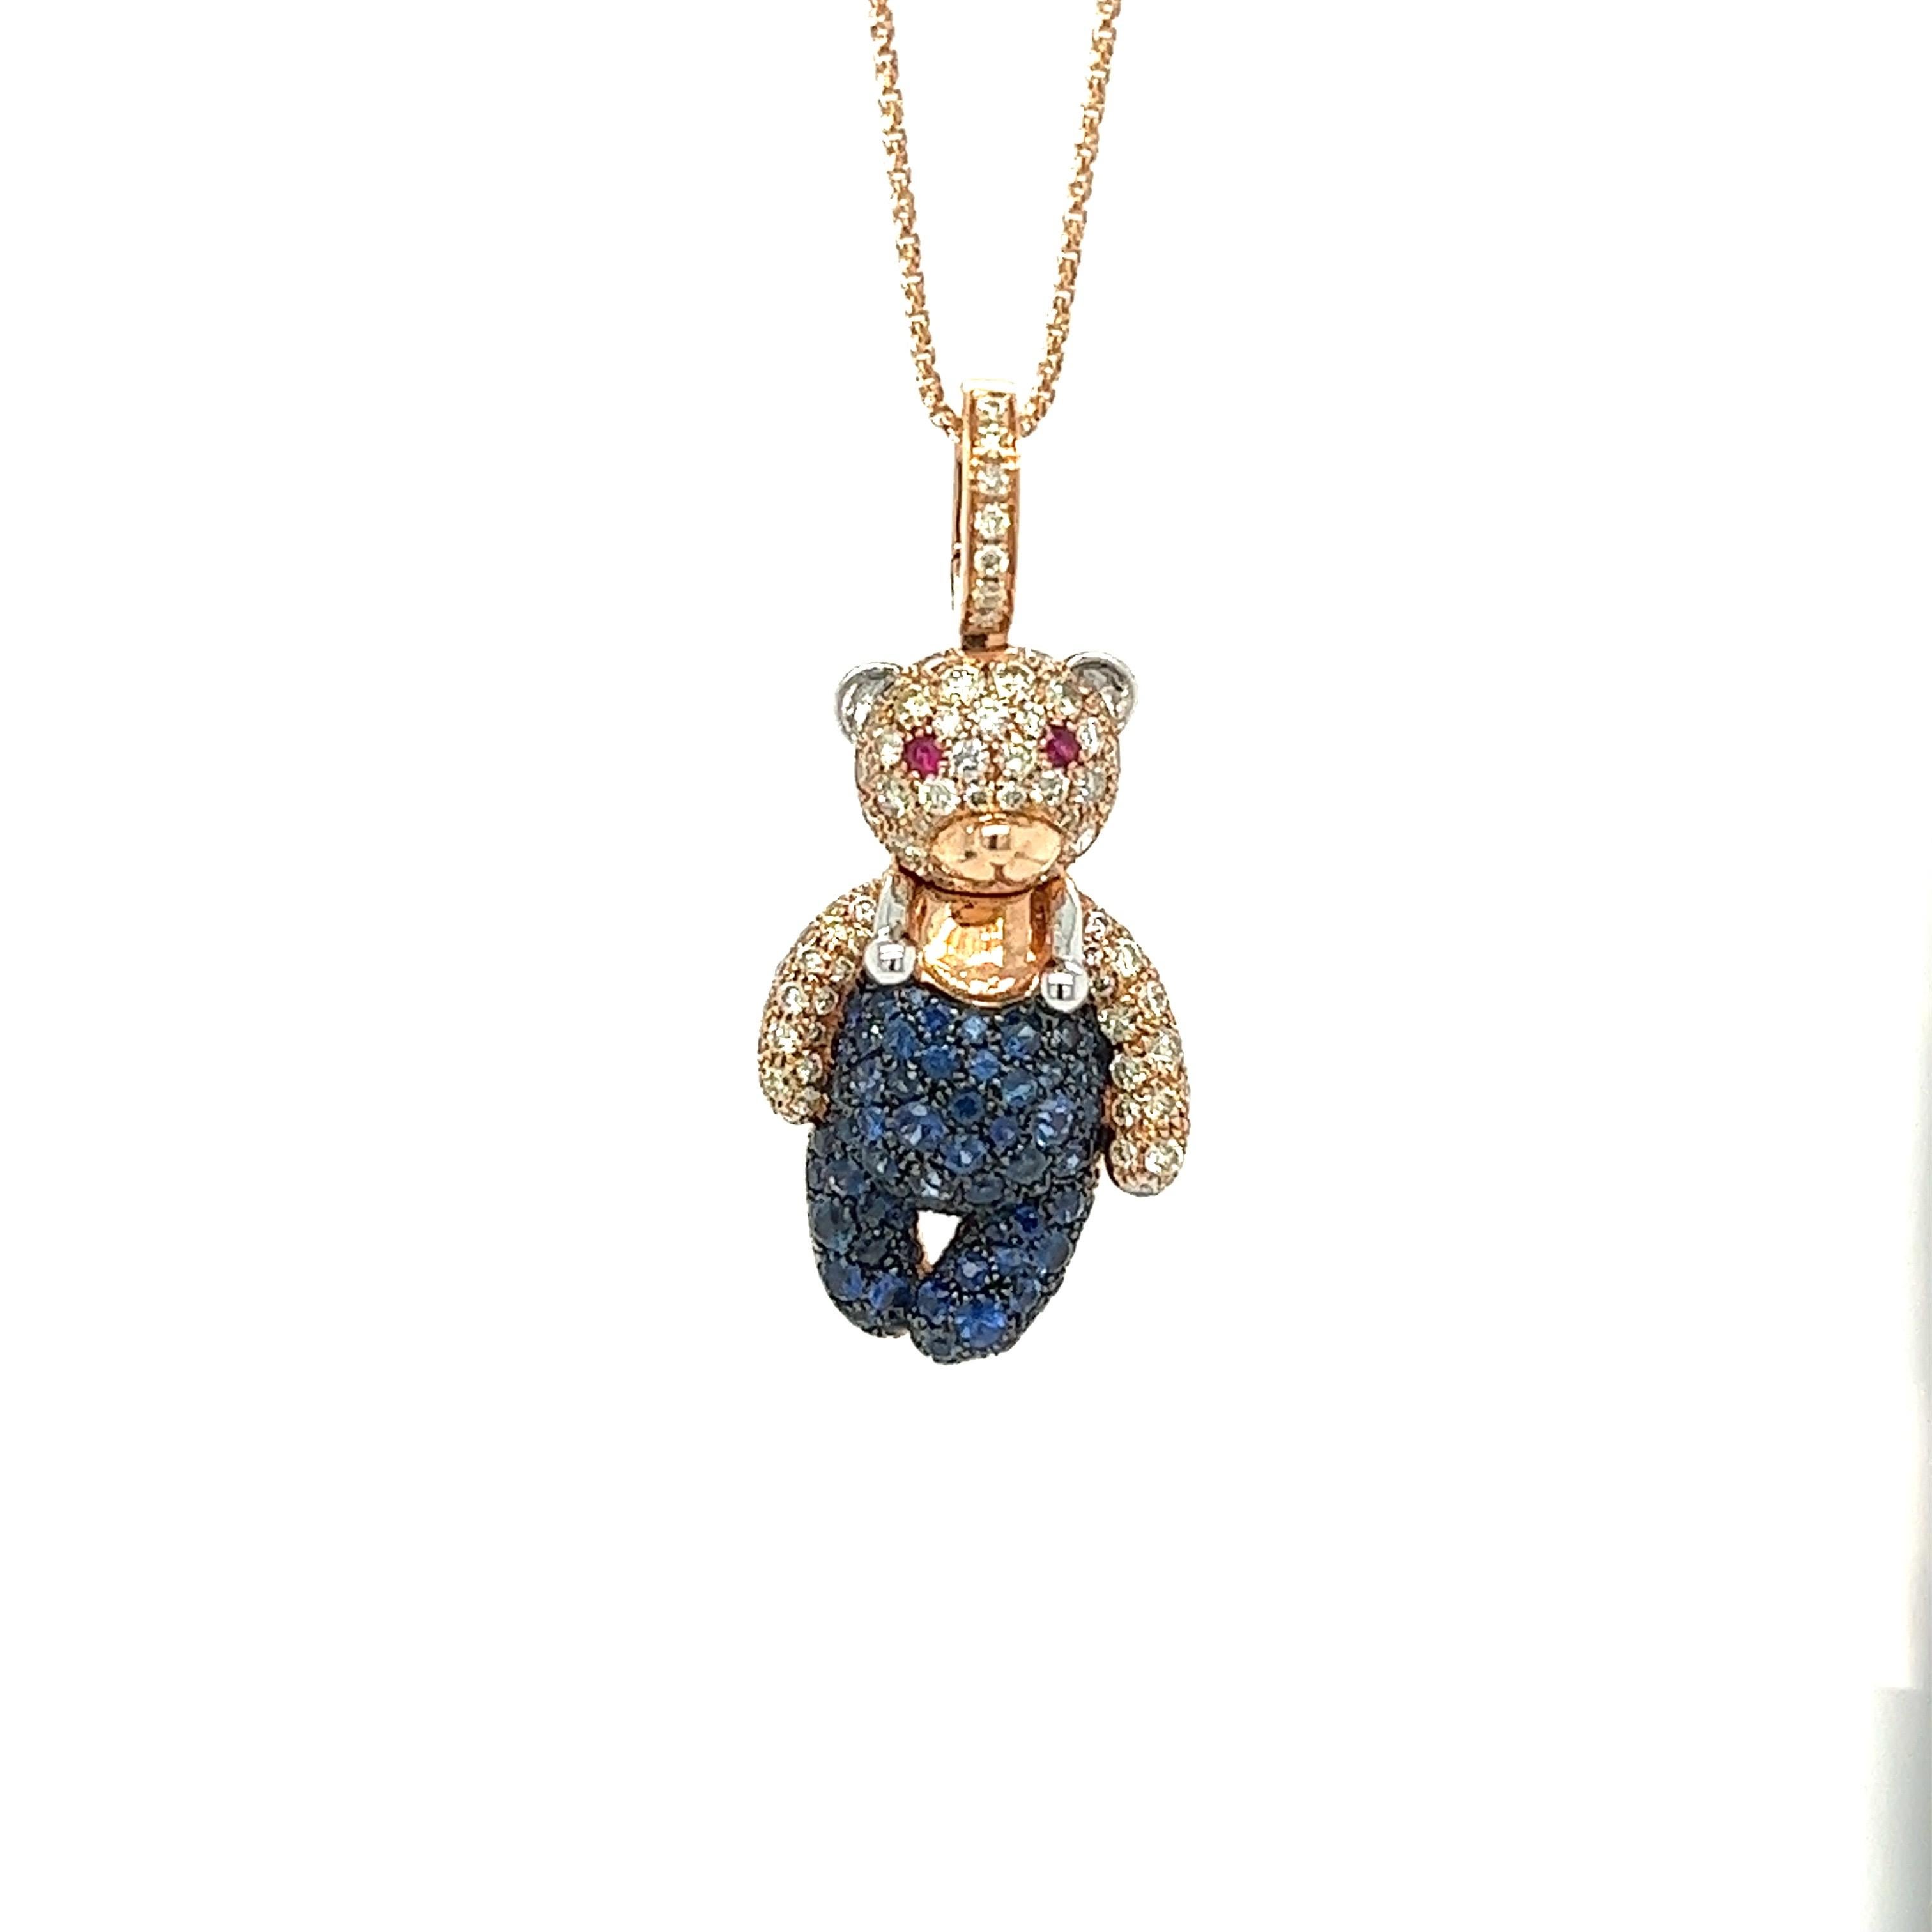 18K Gold Bear Necklace with Fancy Diamonds & Blue Sapphires

72 Blue Sapphires 1.24 CT
82 Fancy Diamonds 0.90 CT
2 Rubies 0.04 CT
18K Rose Gold  7.51 GM

This stunning necklace features a charming bear pendant adorned with beautiful Blue Sapphires,